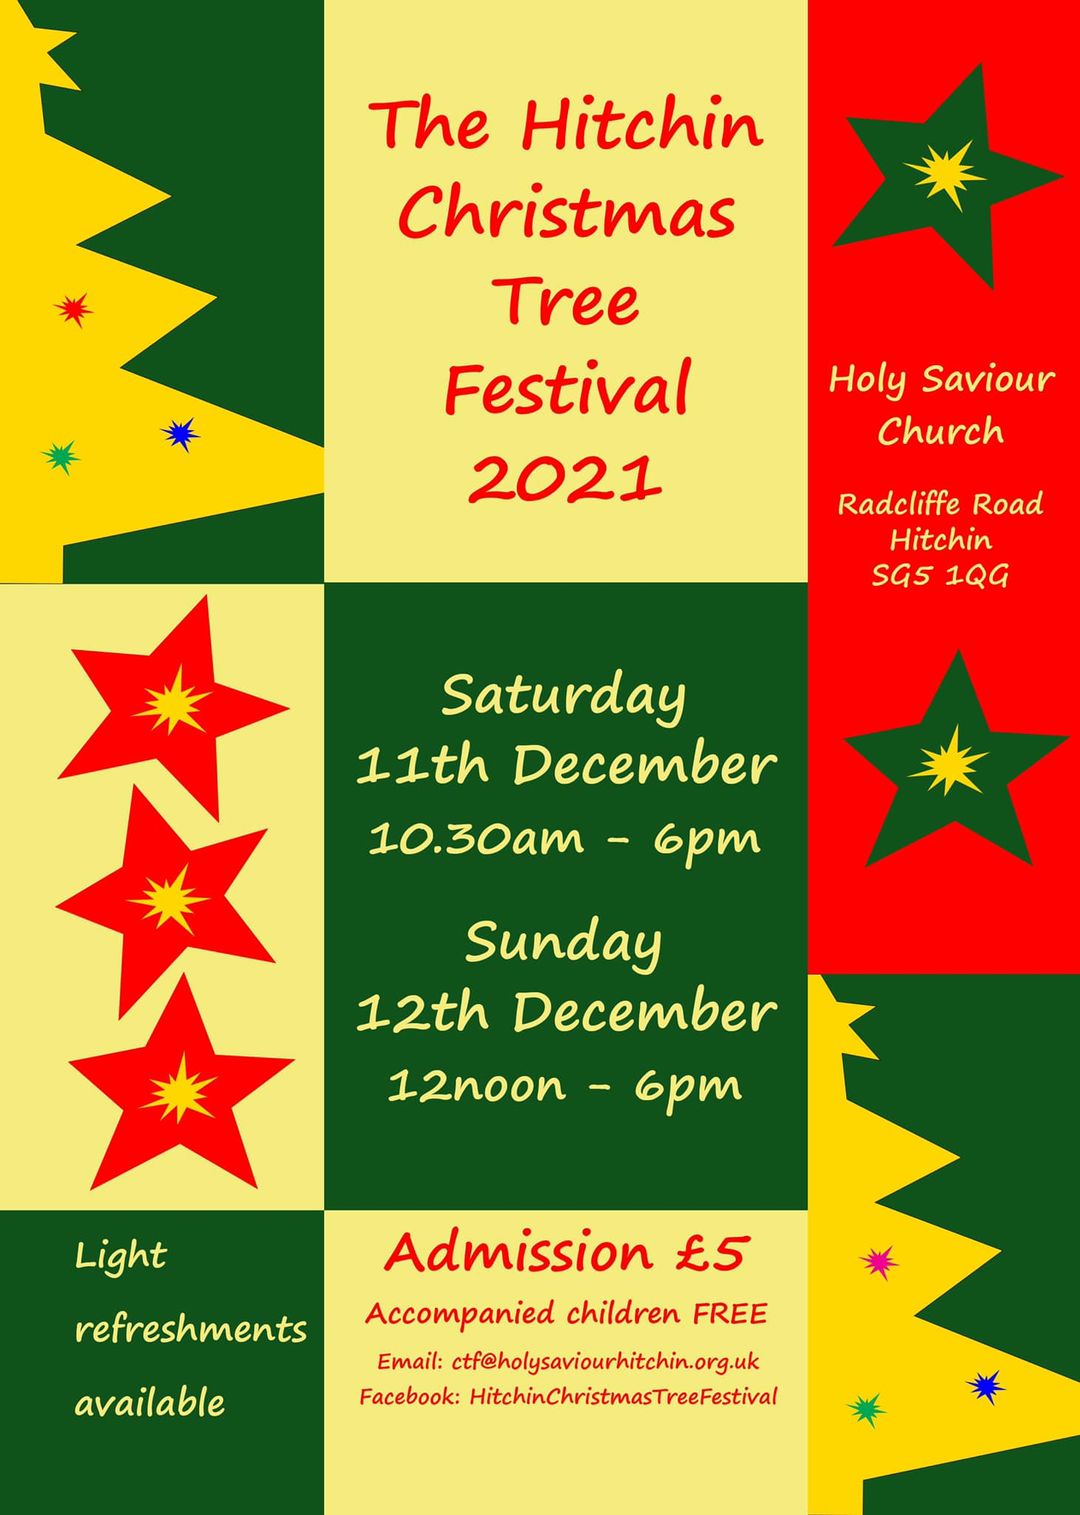 Hitchin Christmas Tree Festival: 11th & 12th December 2021